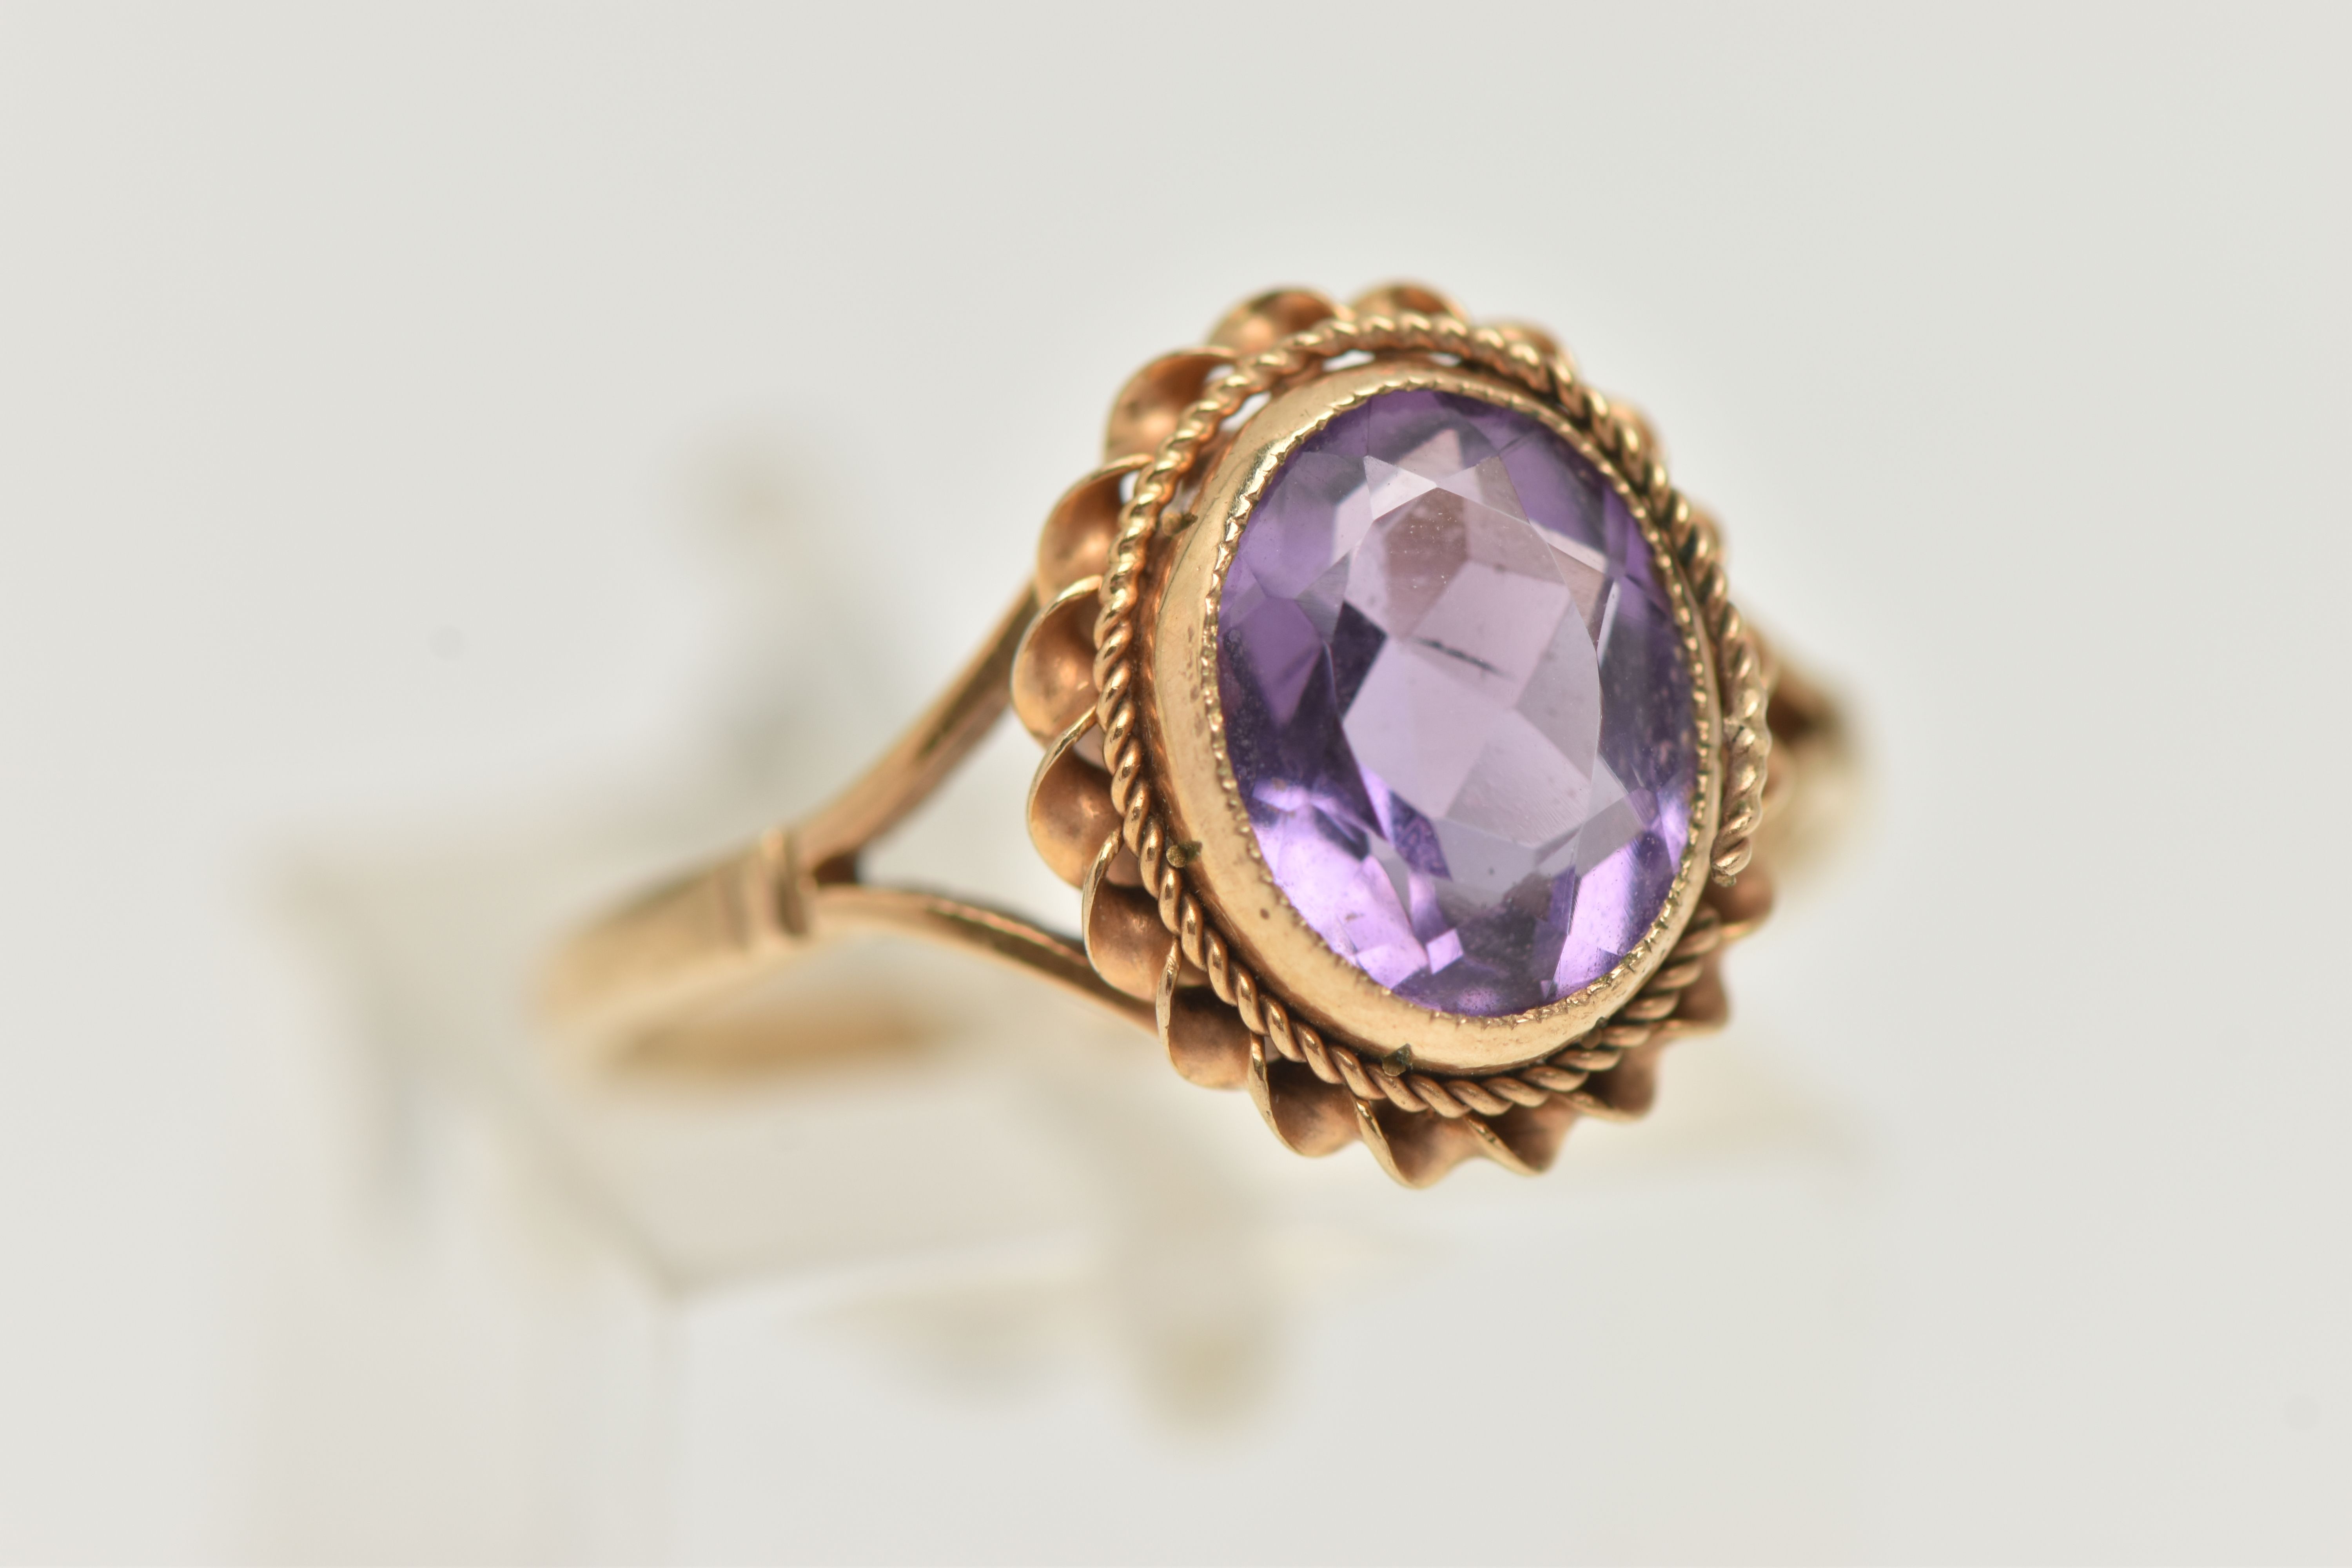 A 9CT GOLD AMETHYST RING, centering on an oval cut amethyst, collet set with a fine rope twist - Image 4 of 4